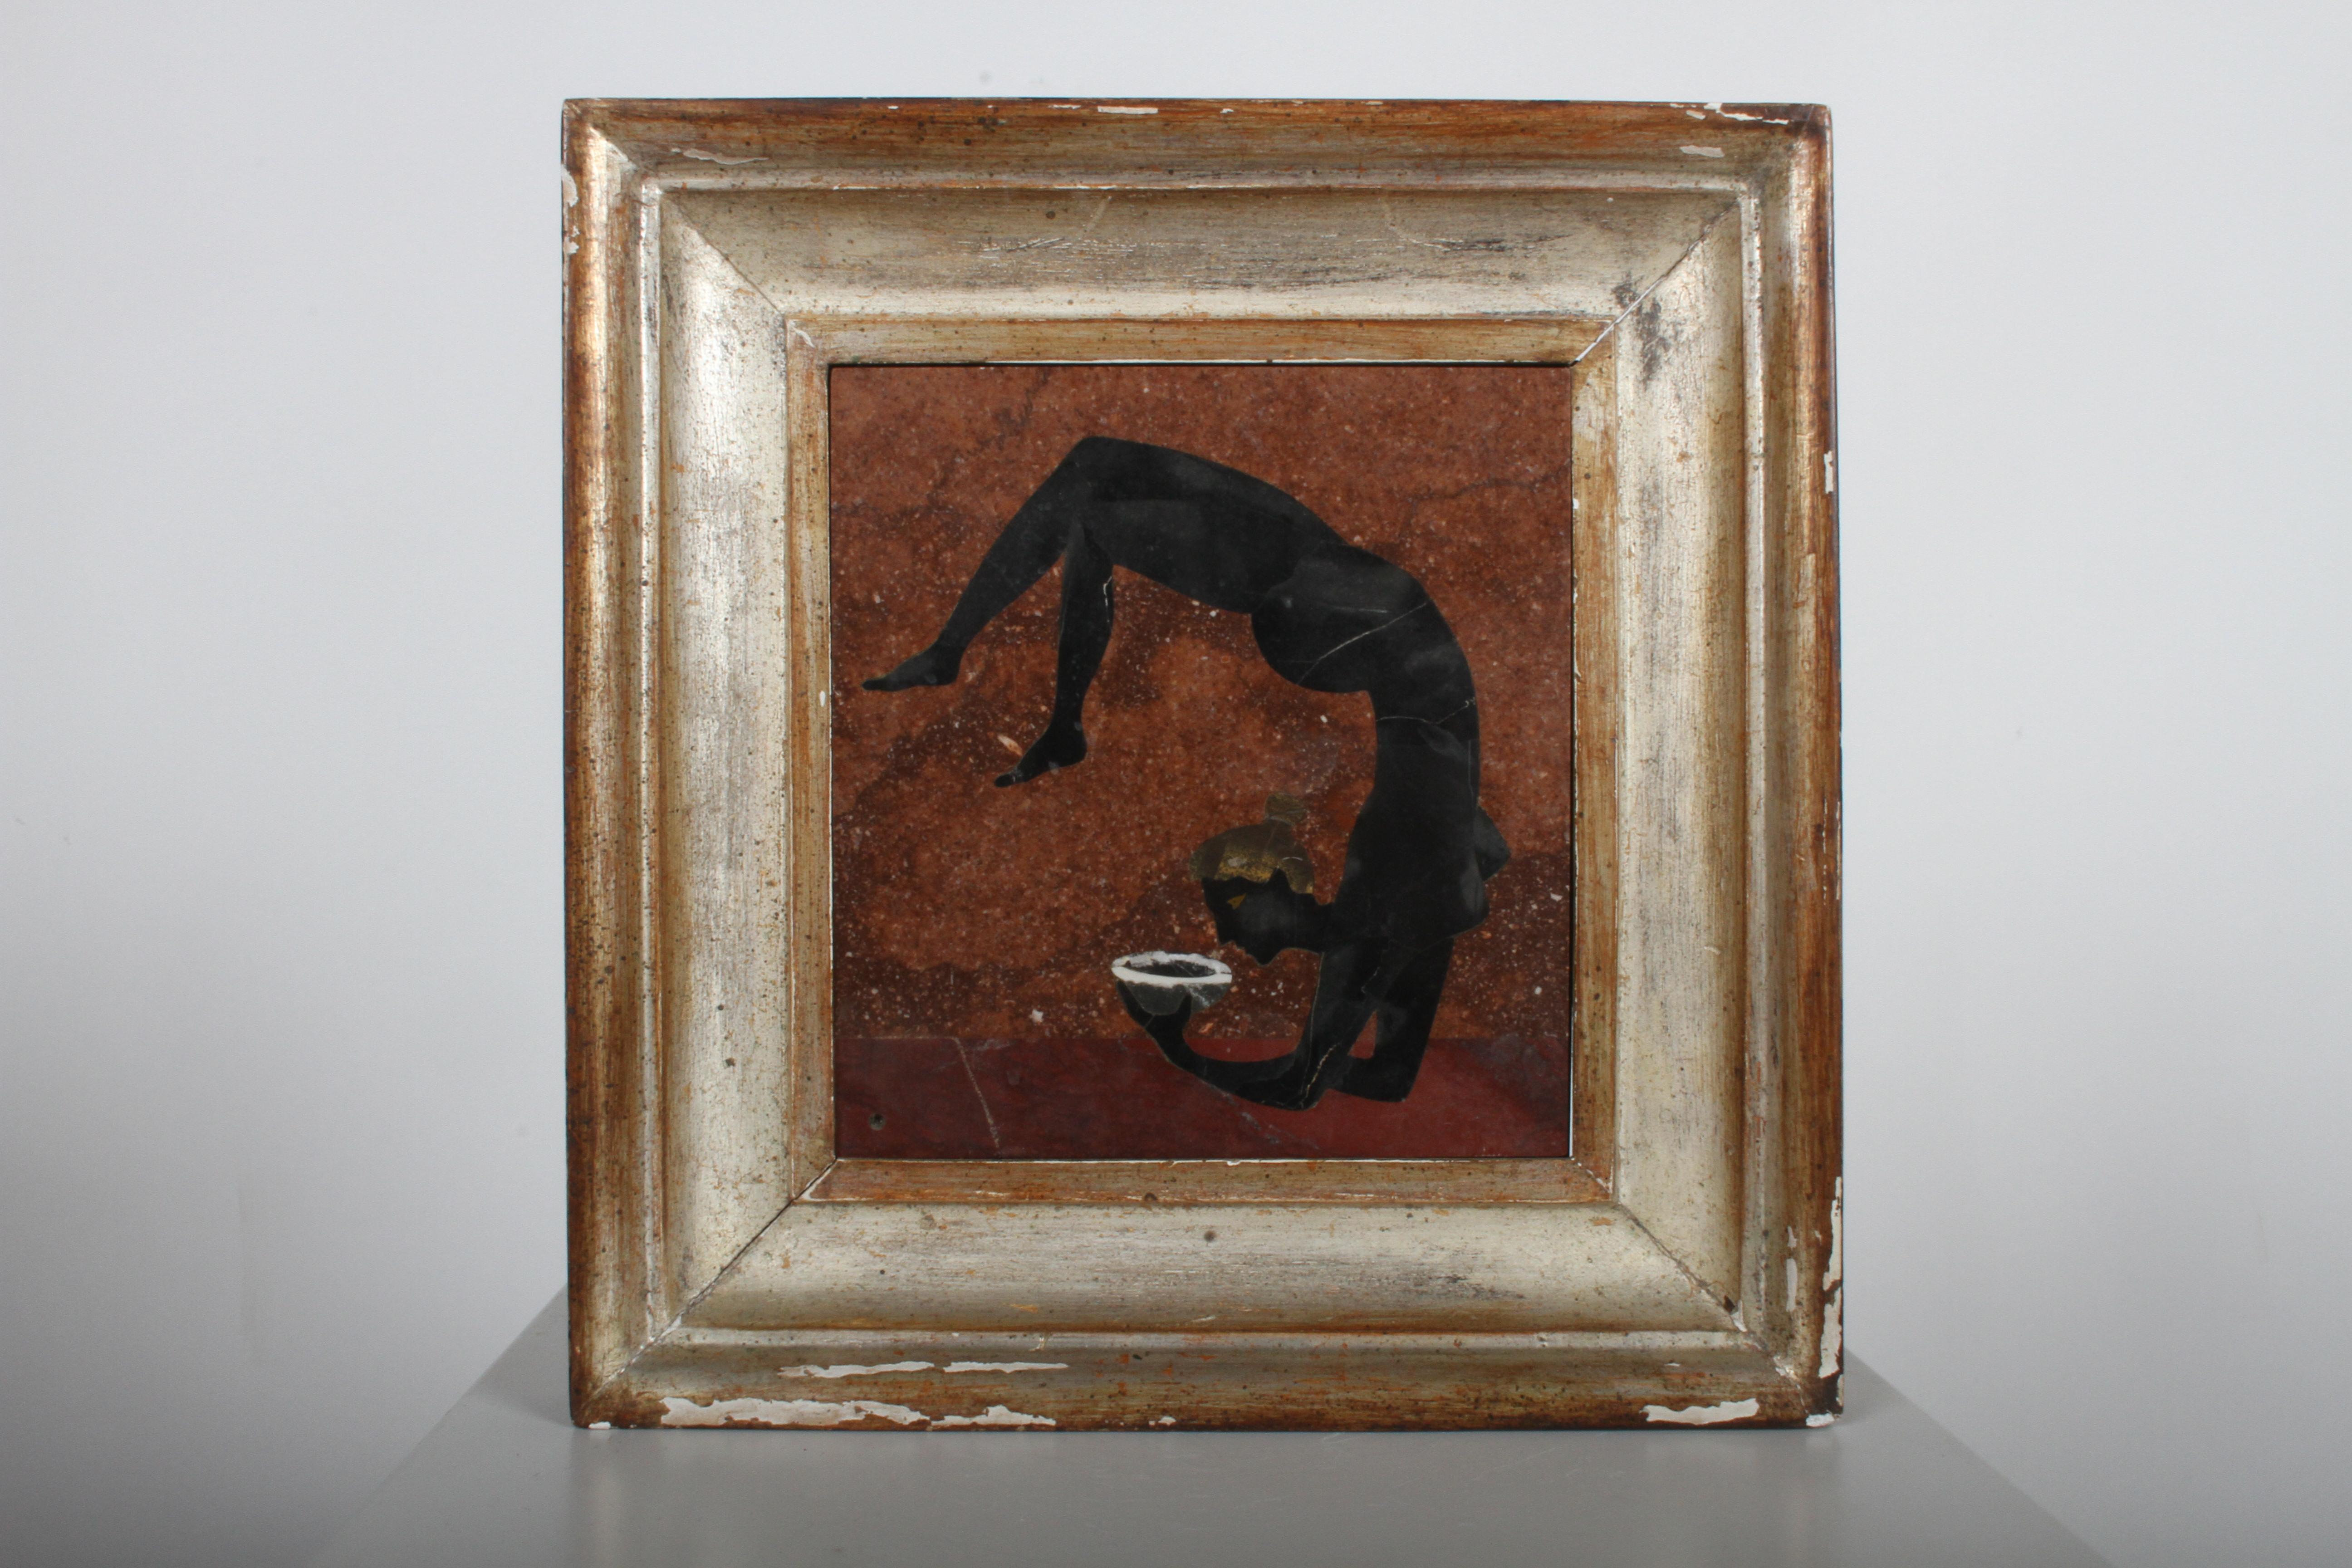 Giovanni Ugolini - Italy circa 1956, framed Pietra Dura polished stone mosaic plaque. Depicts a nude female acrobat, holding a bowl. Verso: retains original label, marked made in Italy 1956, plus artist name Calde. Light scuffs to plaque, wear to